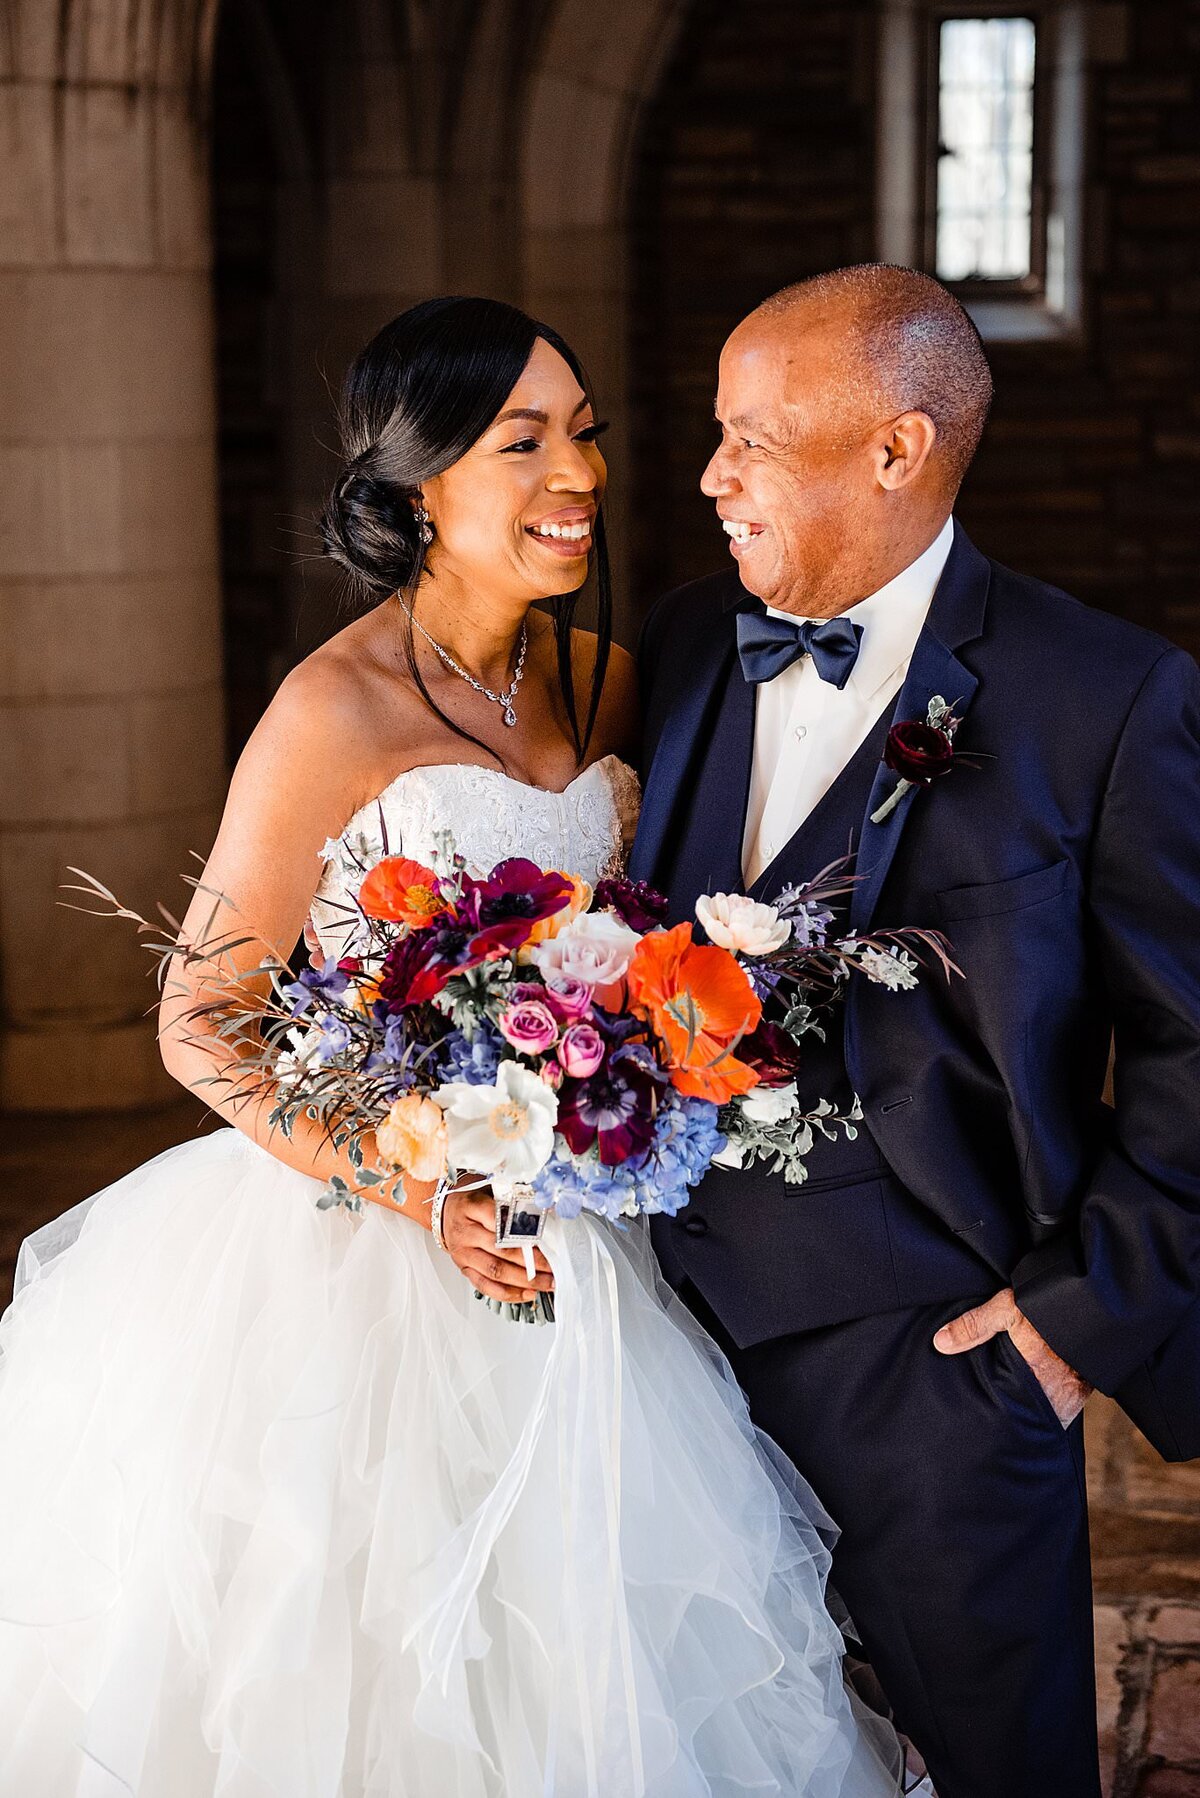 The bride and groom share a laugh inside the church. The groom is wearing a black tuxedo with a white shirt and a black bow tie. The bride is wearing a strapless gown with a sweetheart neckline and  ruffled organza skirt. She is holding a large colorful bouquet of flowers. The flowers are deep red, deep orange, blue, deep purple, yellow, blush and ivory.